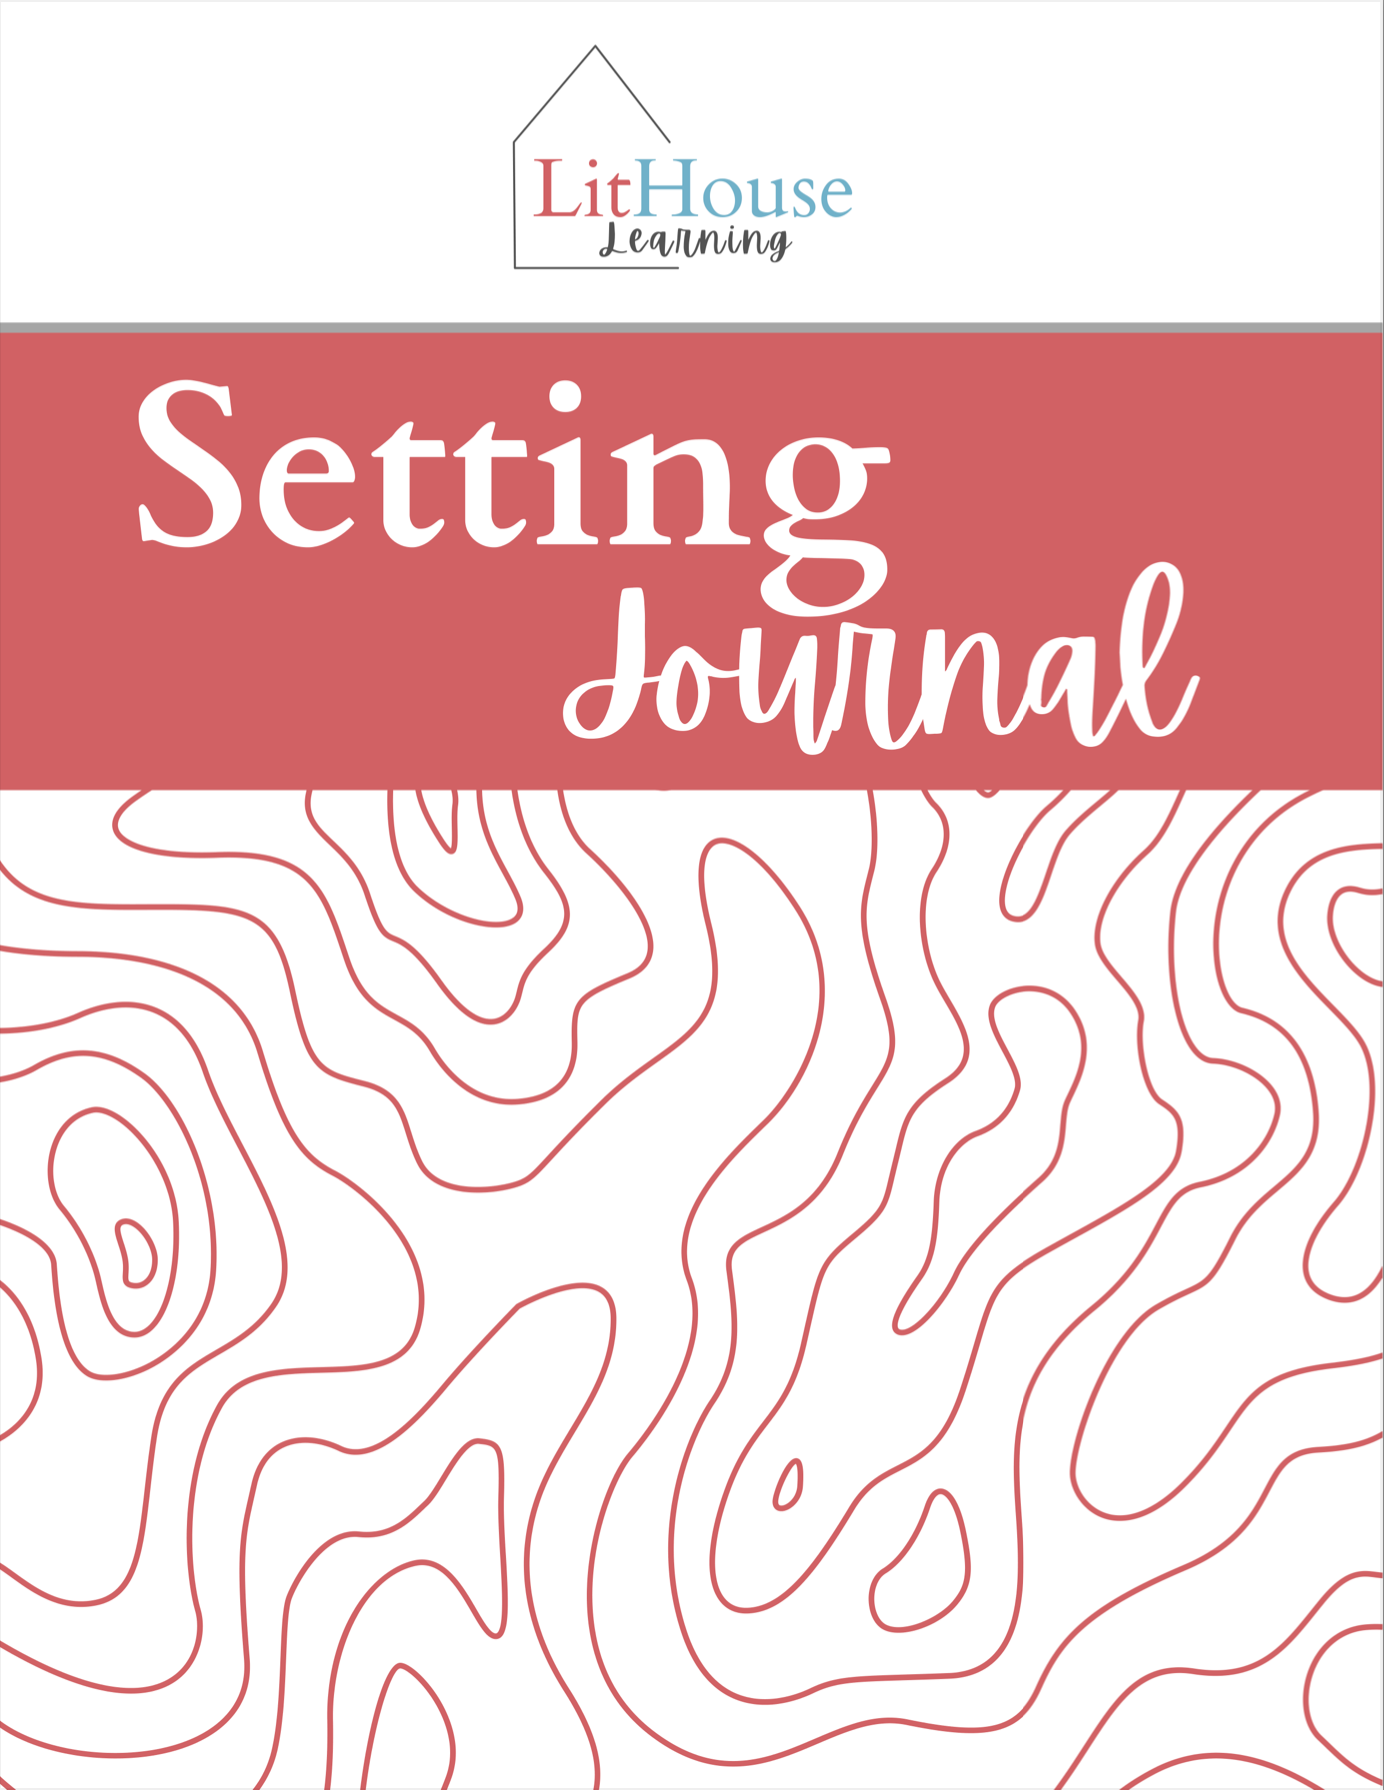 Book Review Journal – LitHouse Learning